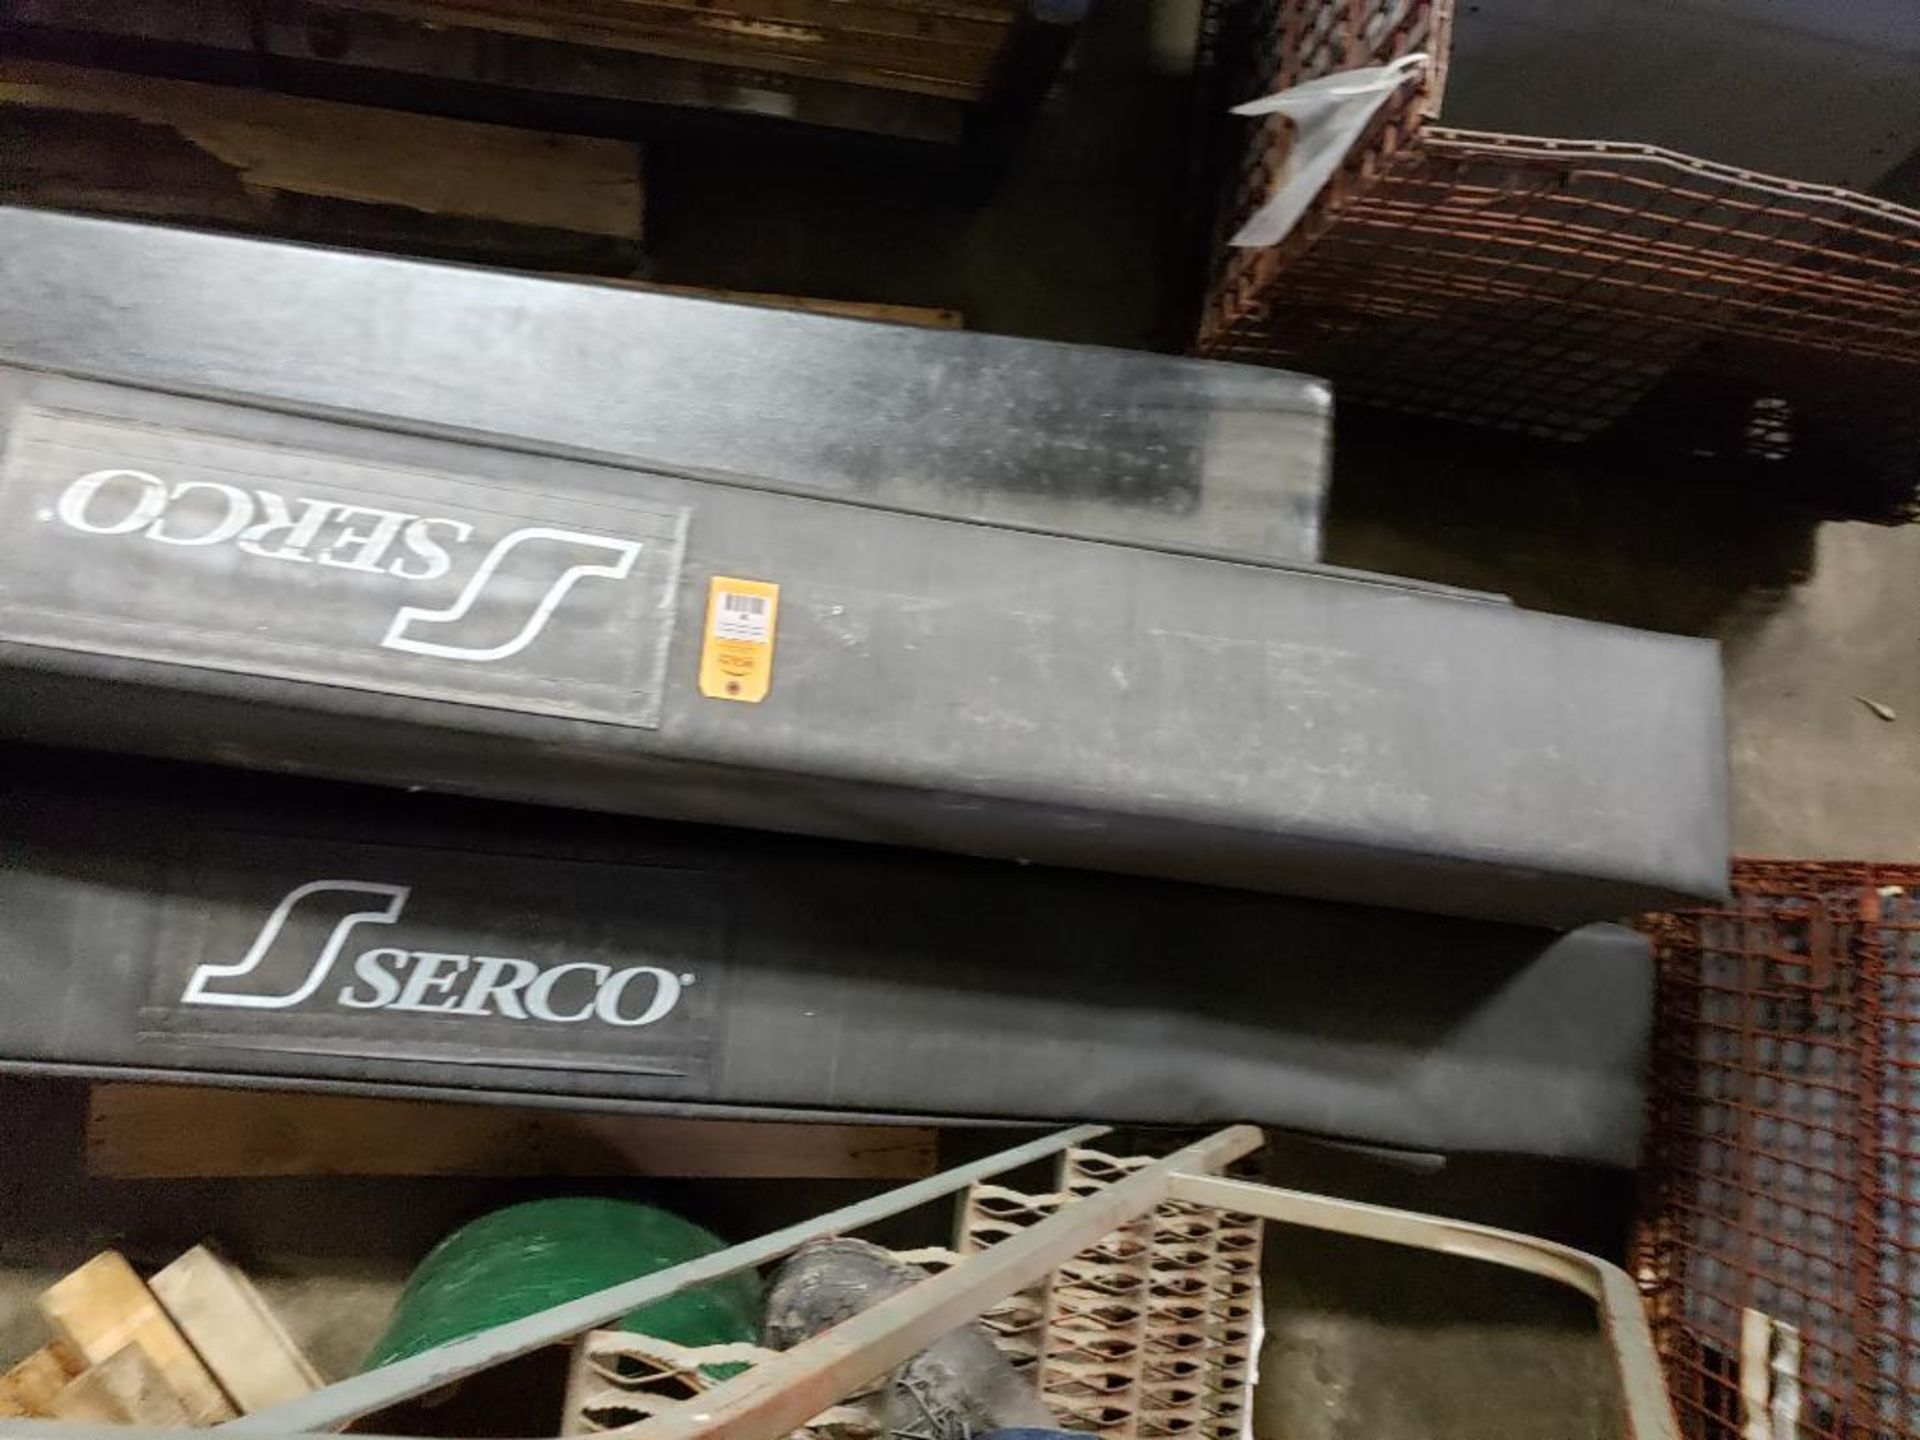 Qty 4 - Serco dock bumpers. - Image 6 of 6